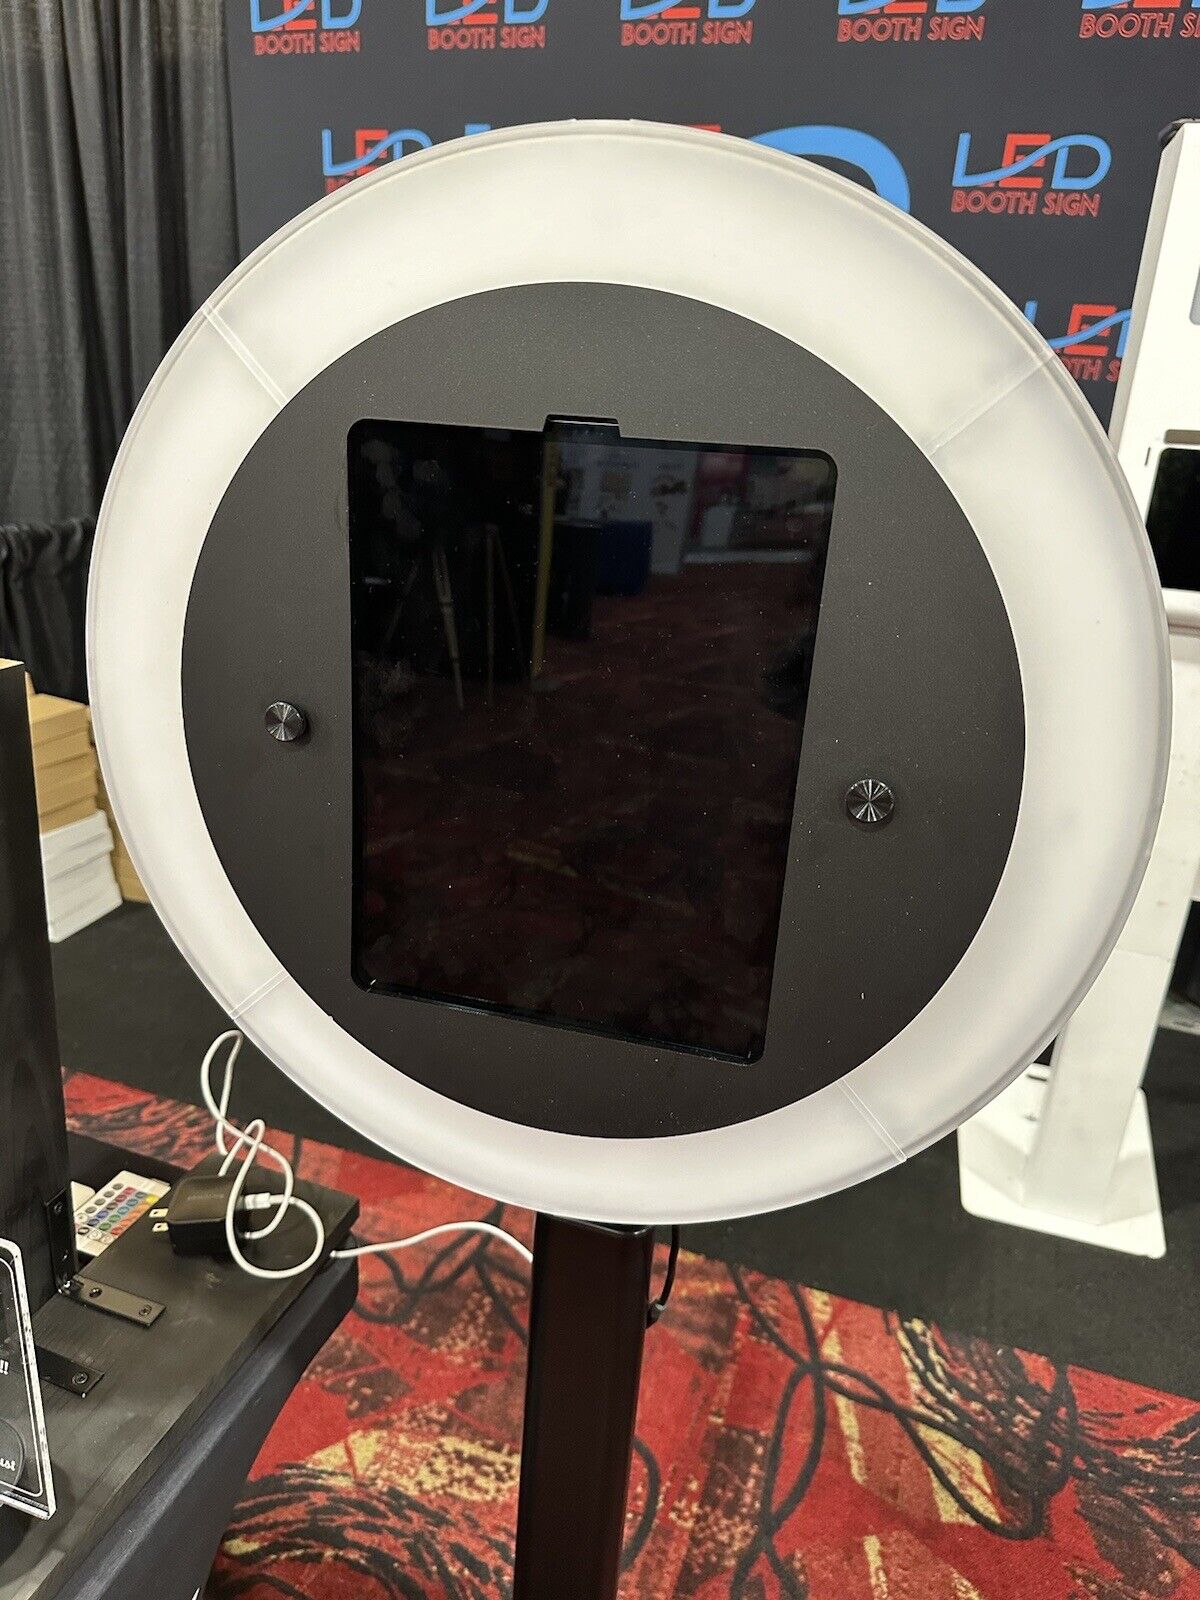 iPad Photo Booth - With Ring Light w/DIMMER- Fits iPads/Tablets  DIY Photobooth